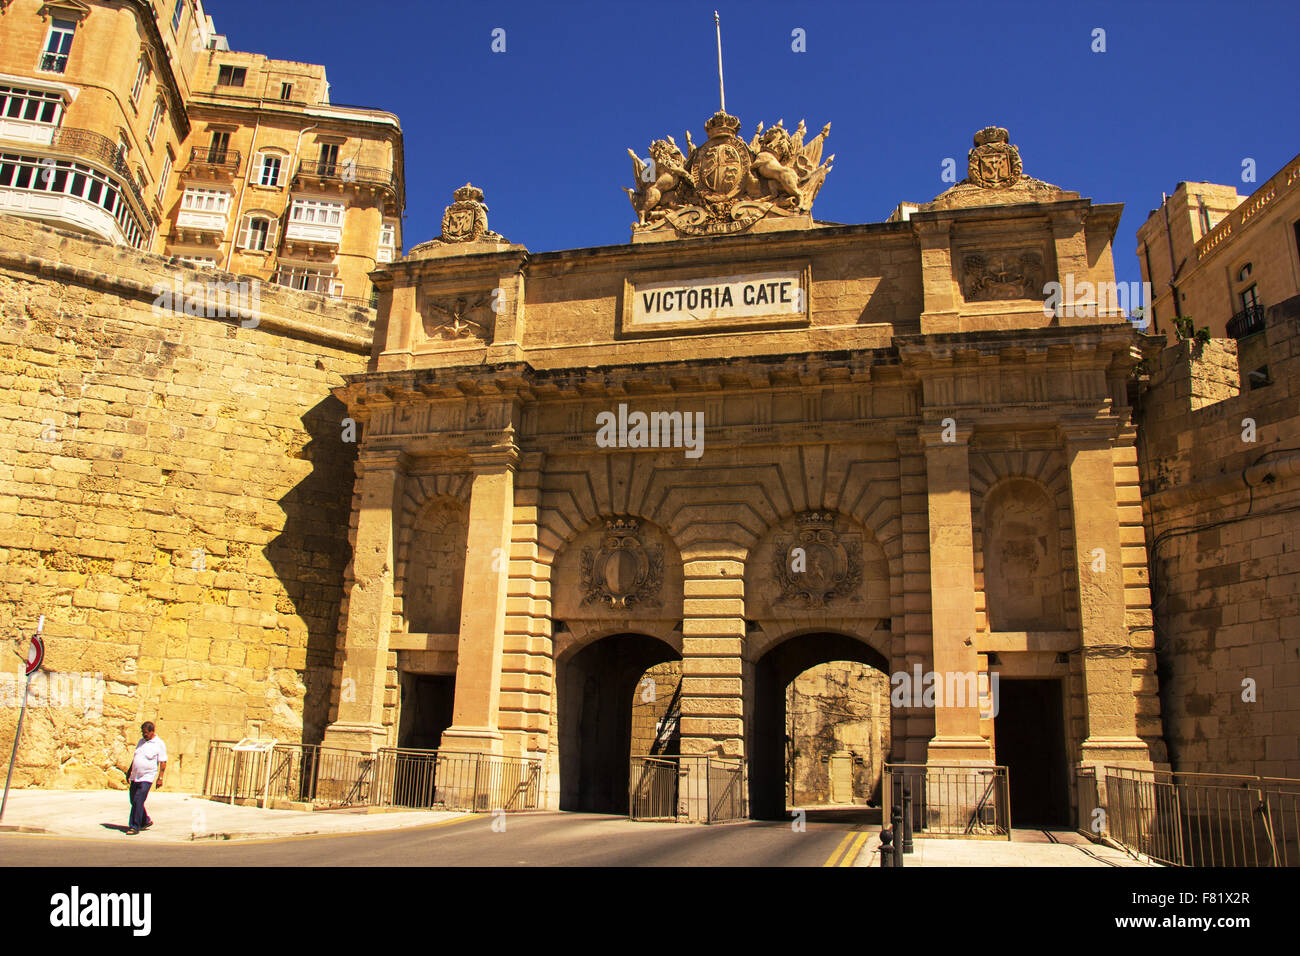 Man walking away from Victoria cate archway in Valletta Stock Photo